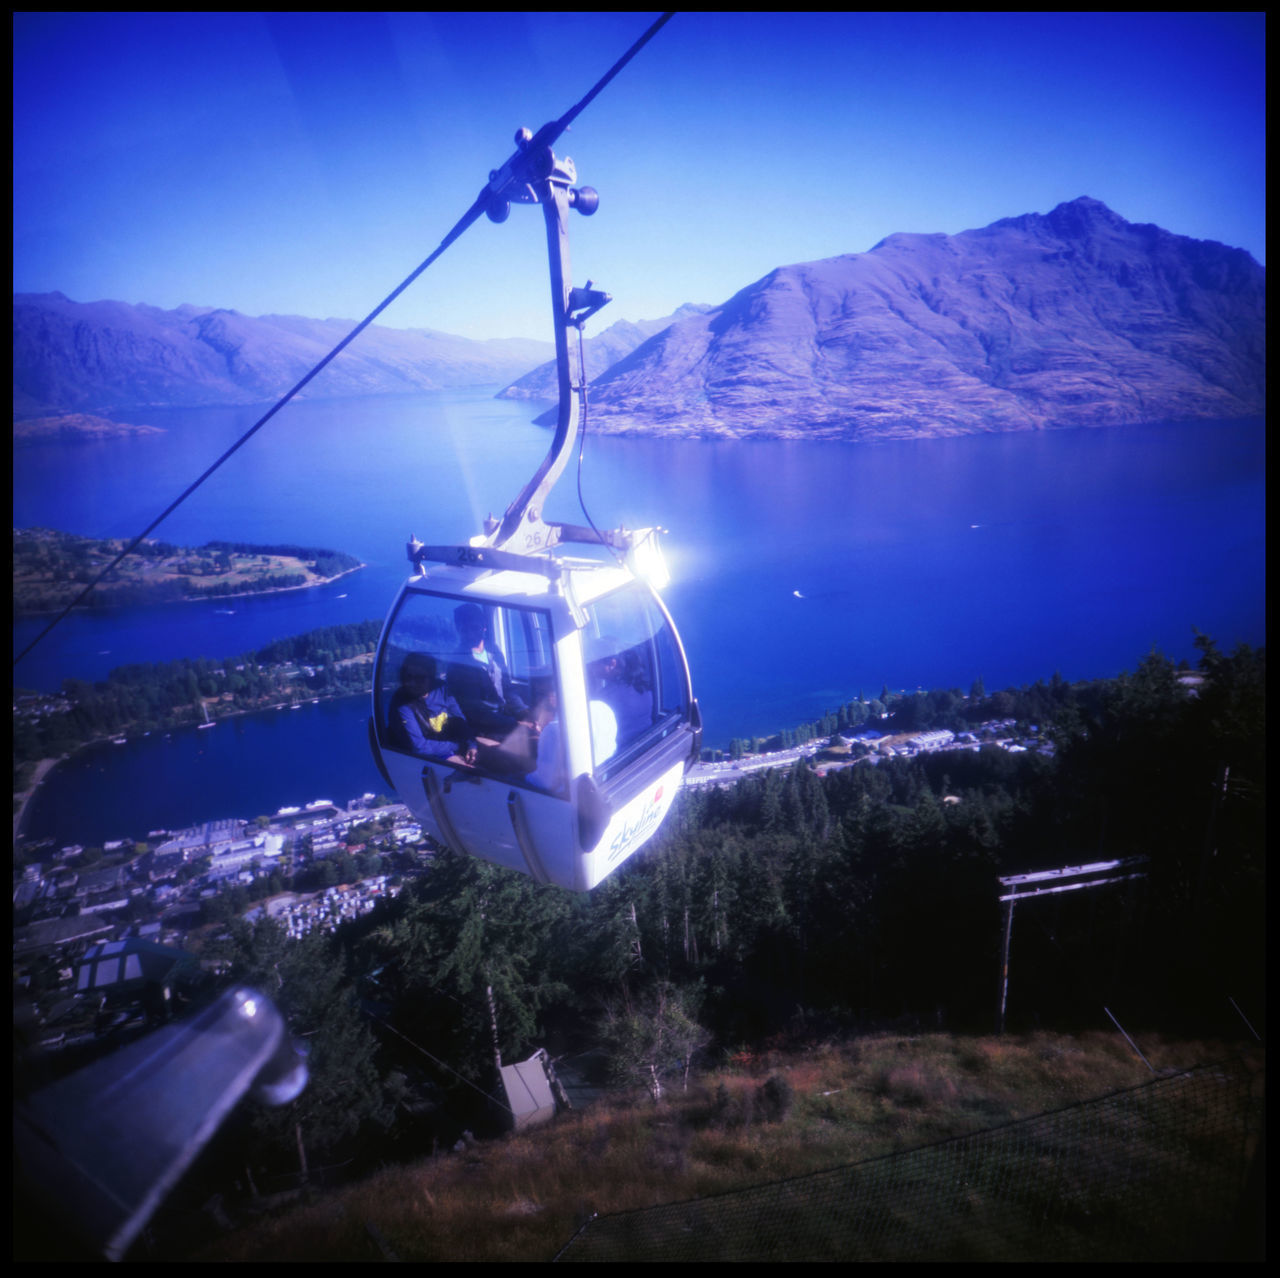 OVERHEAD CABLE CAR ON MOUNTAINS